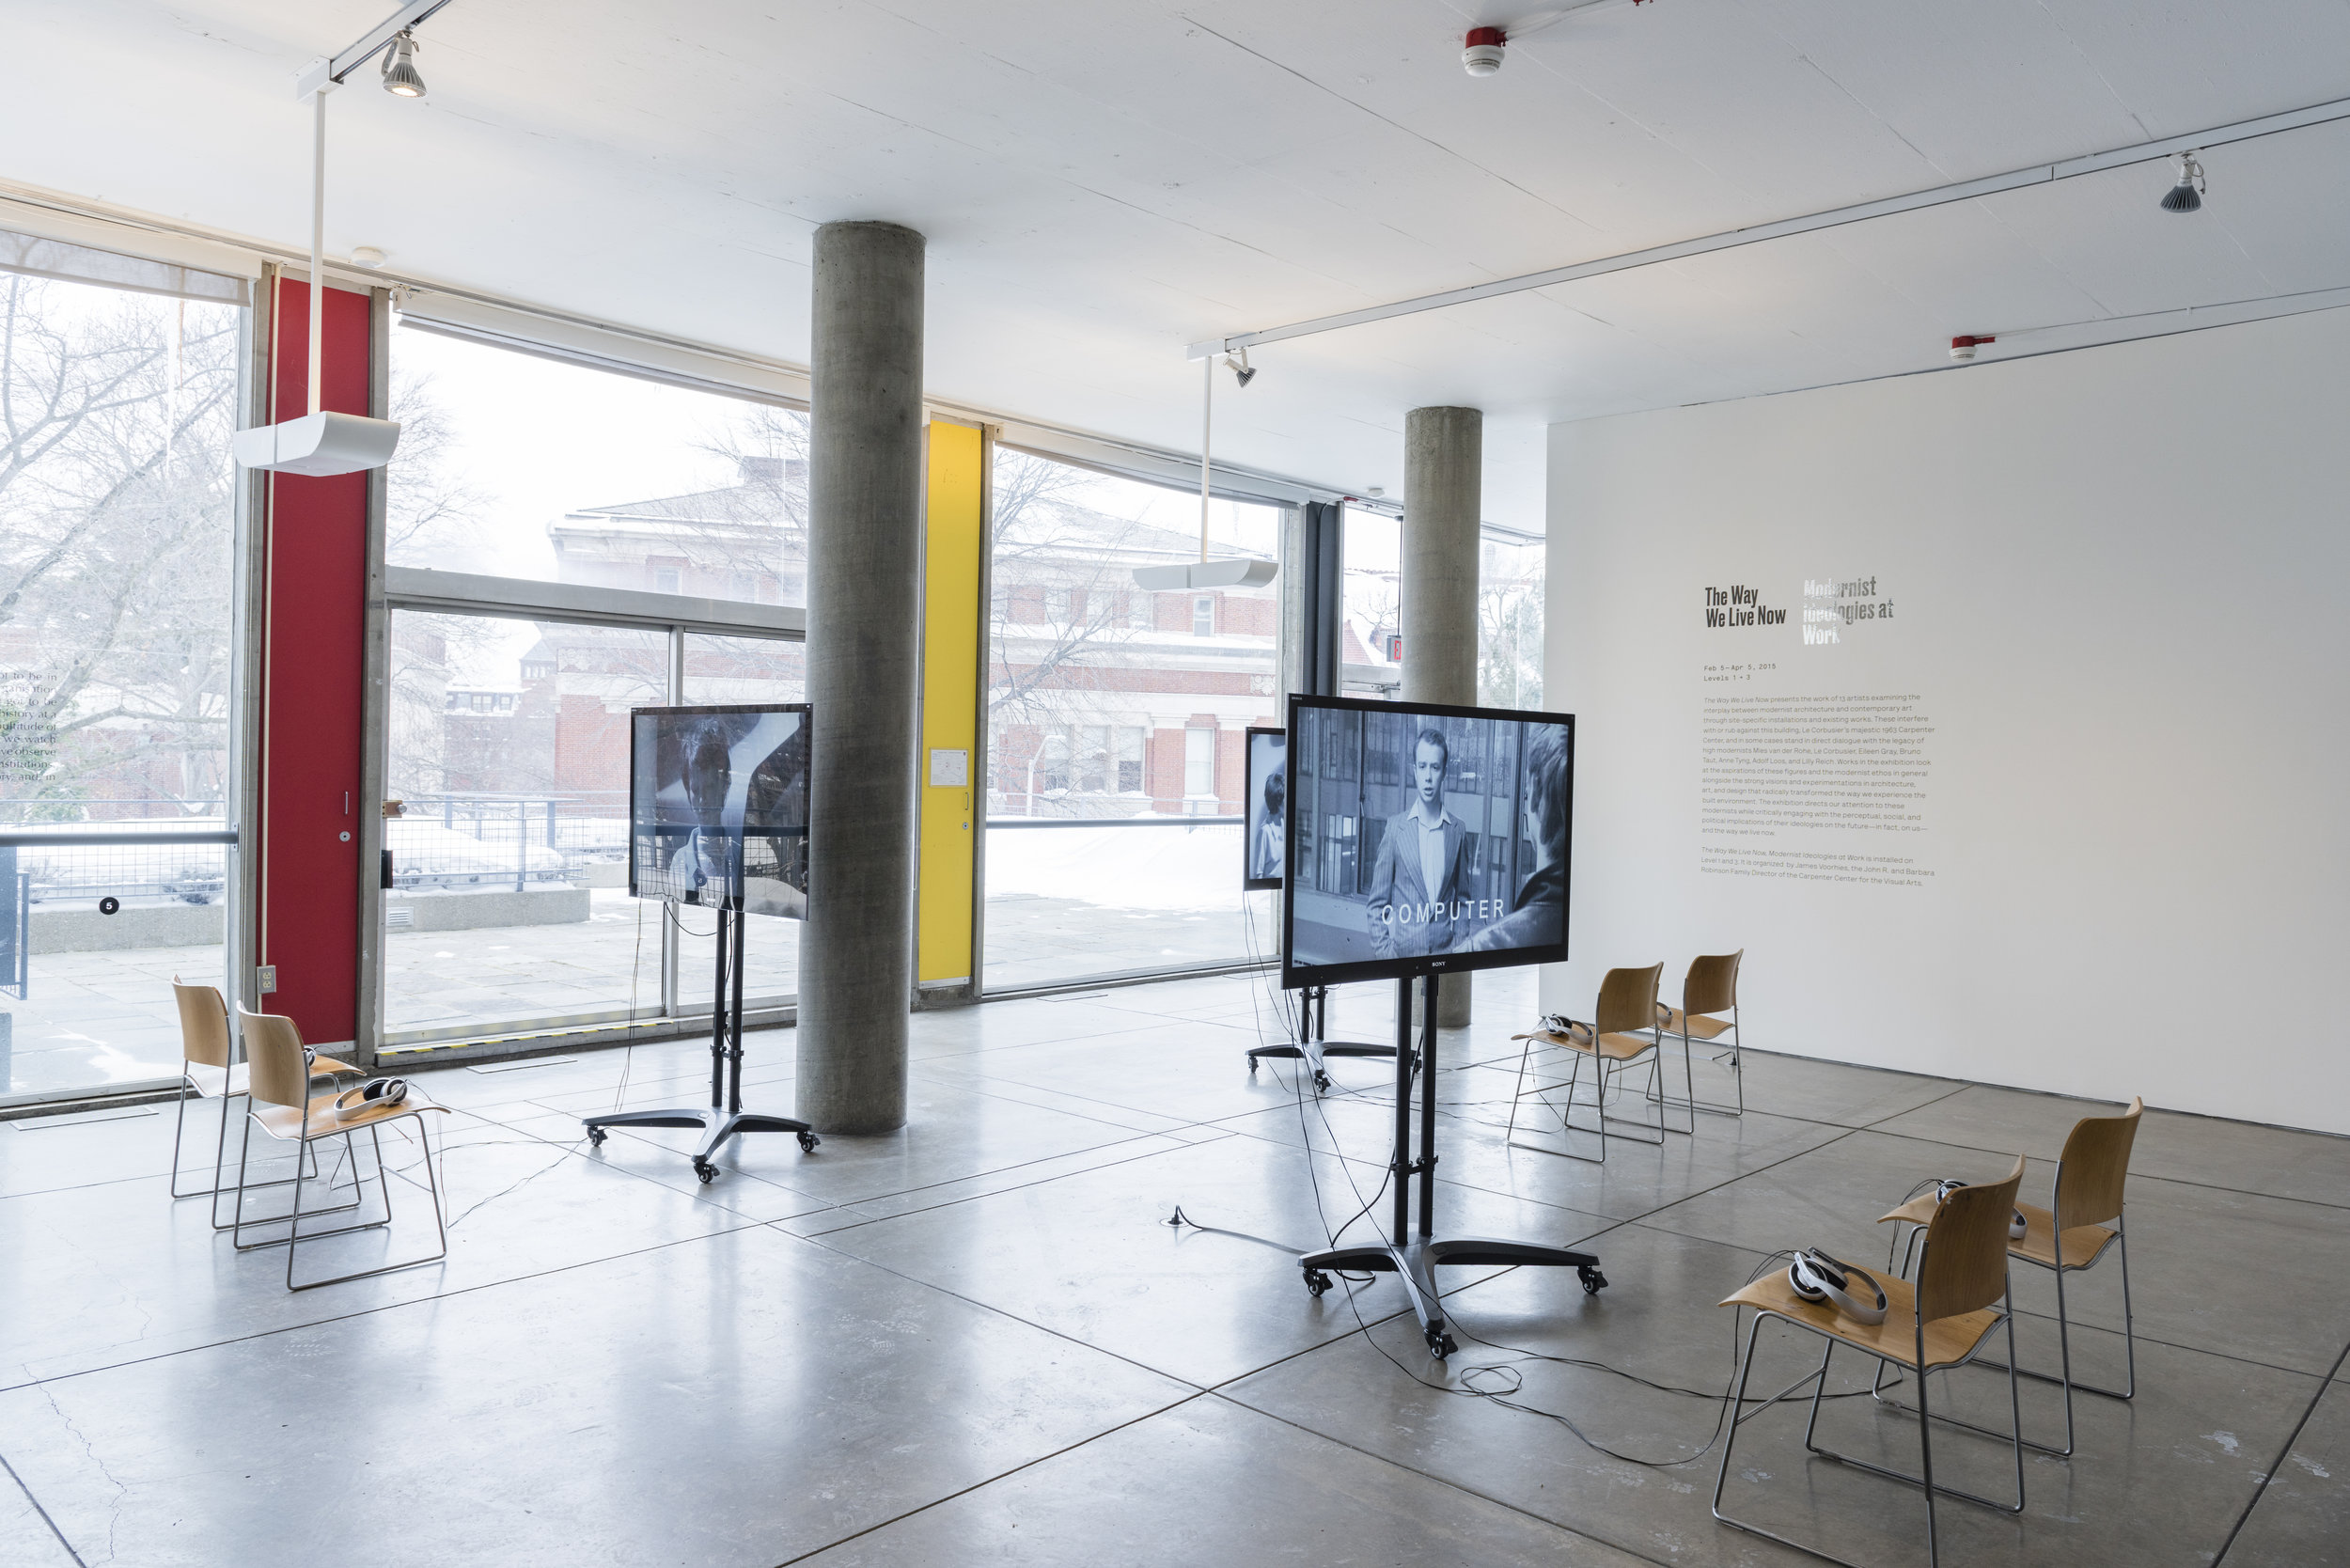  Gerard Byrne,&nbsp; Subject , 2009, installation view, three-channel video shown on monitors and vinyl wall text. 27 × 32 feet. Commissioned by the Henry Moore Institute, Leeds, England. Courtesy the artist and Green on Red Gallery, Dublin. 